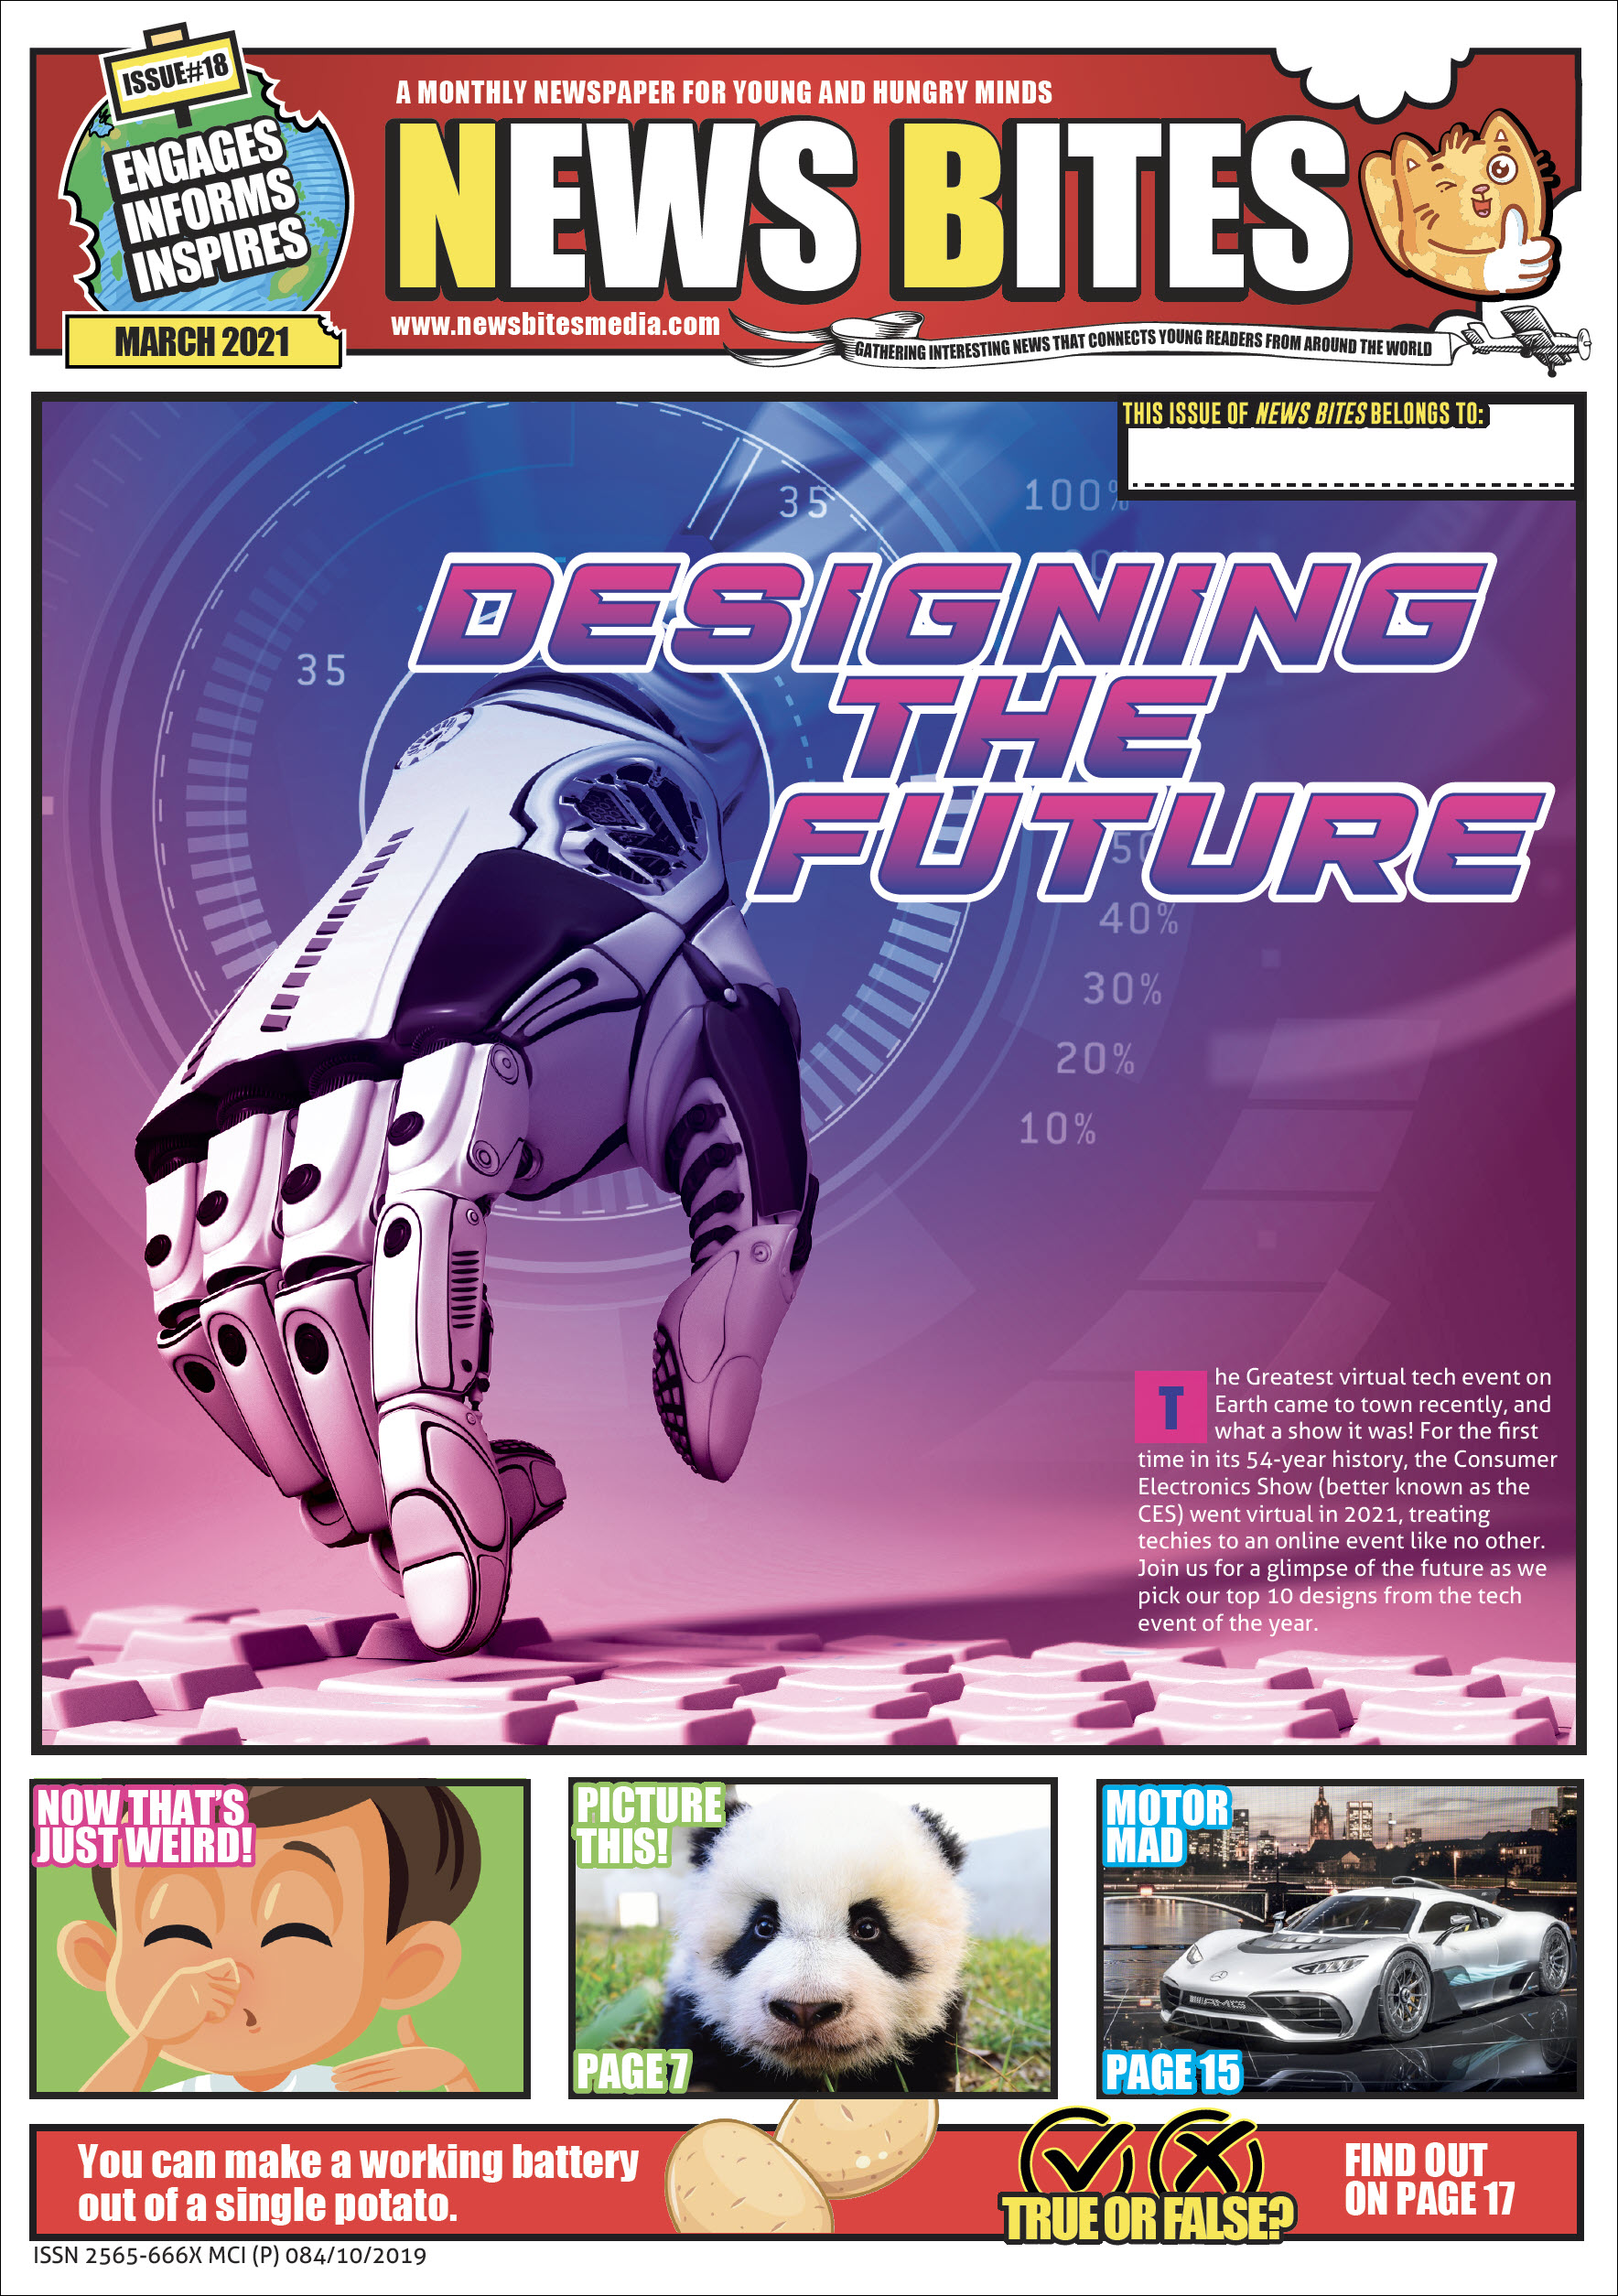 Newsbites Magazines for Schools - Issue No. 18, MARCH 2021